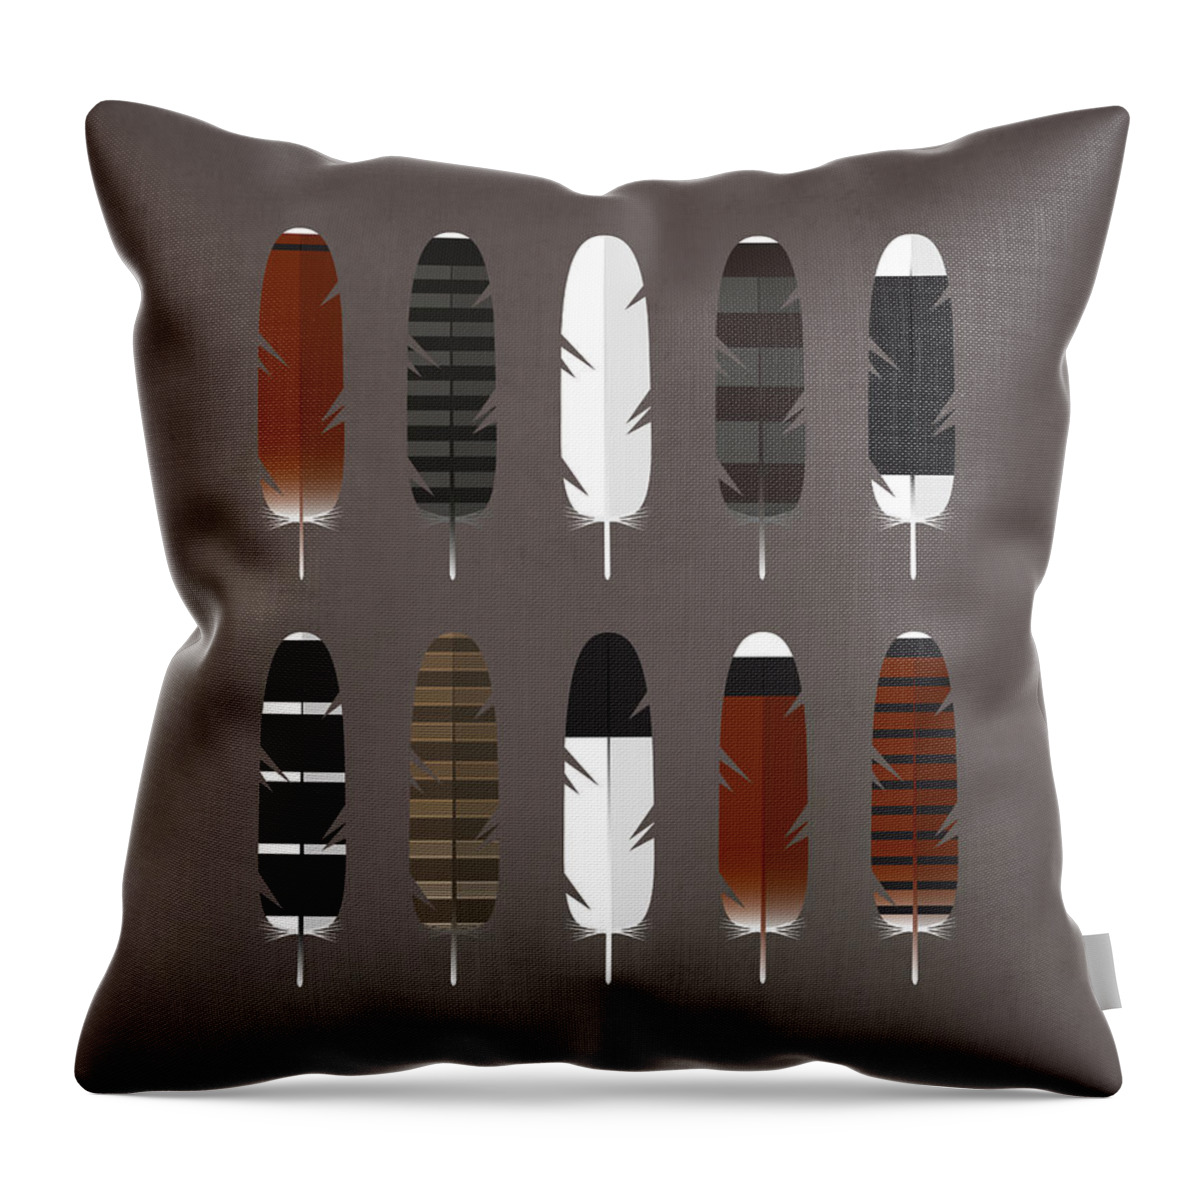 Raptors Throw Pillow featuring the digital art Raptor Feathers - Square by Peter Green